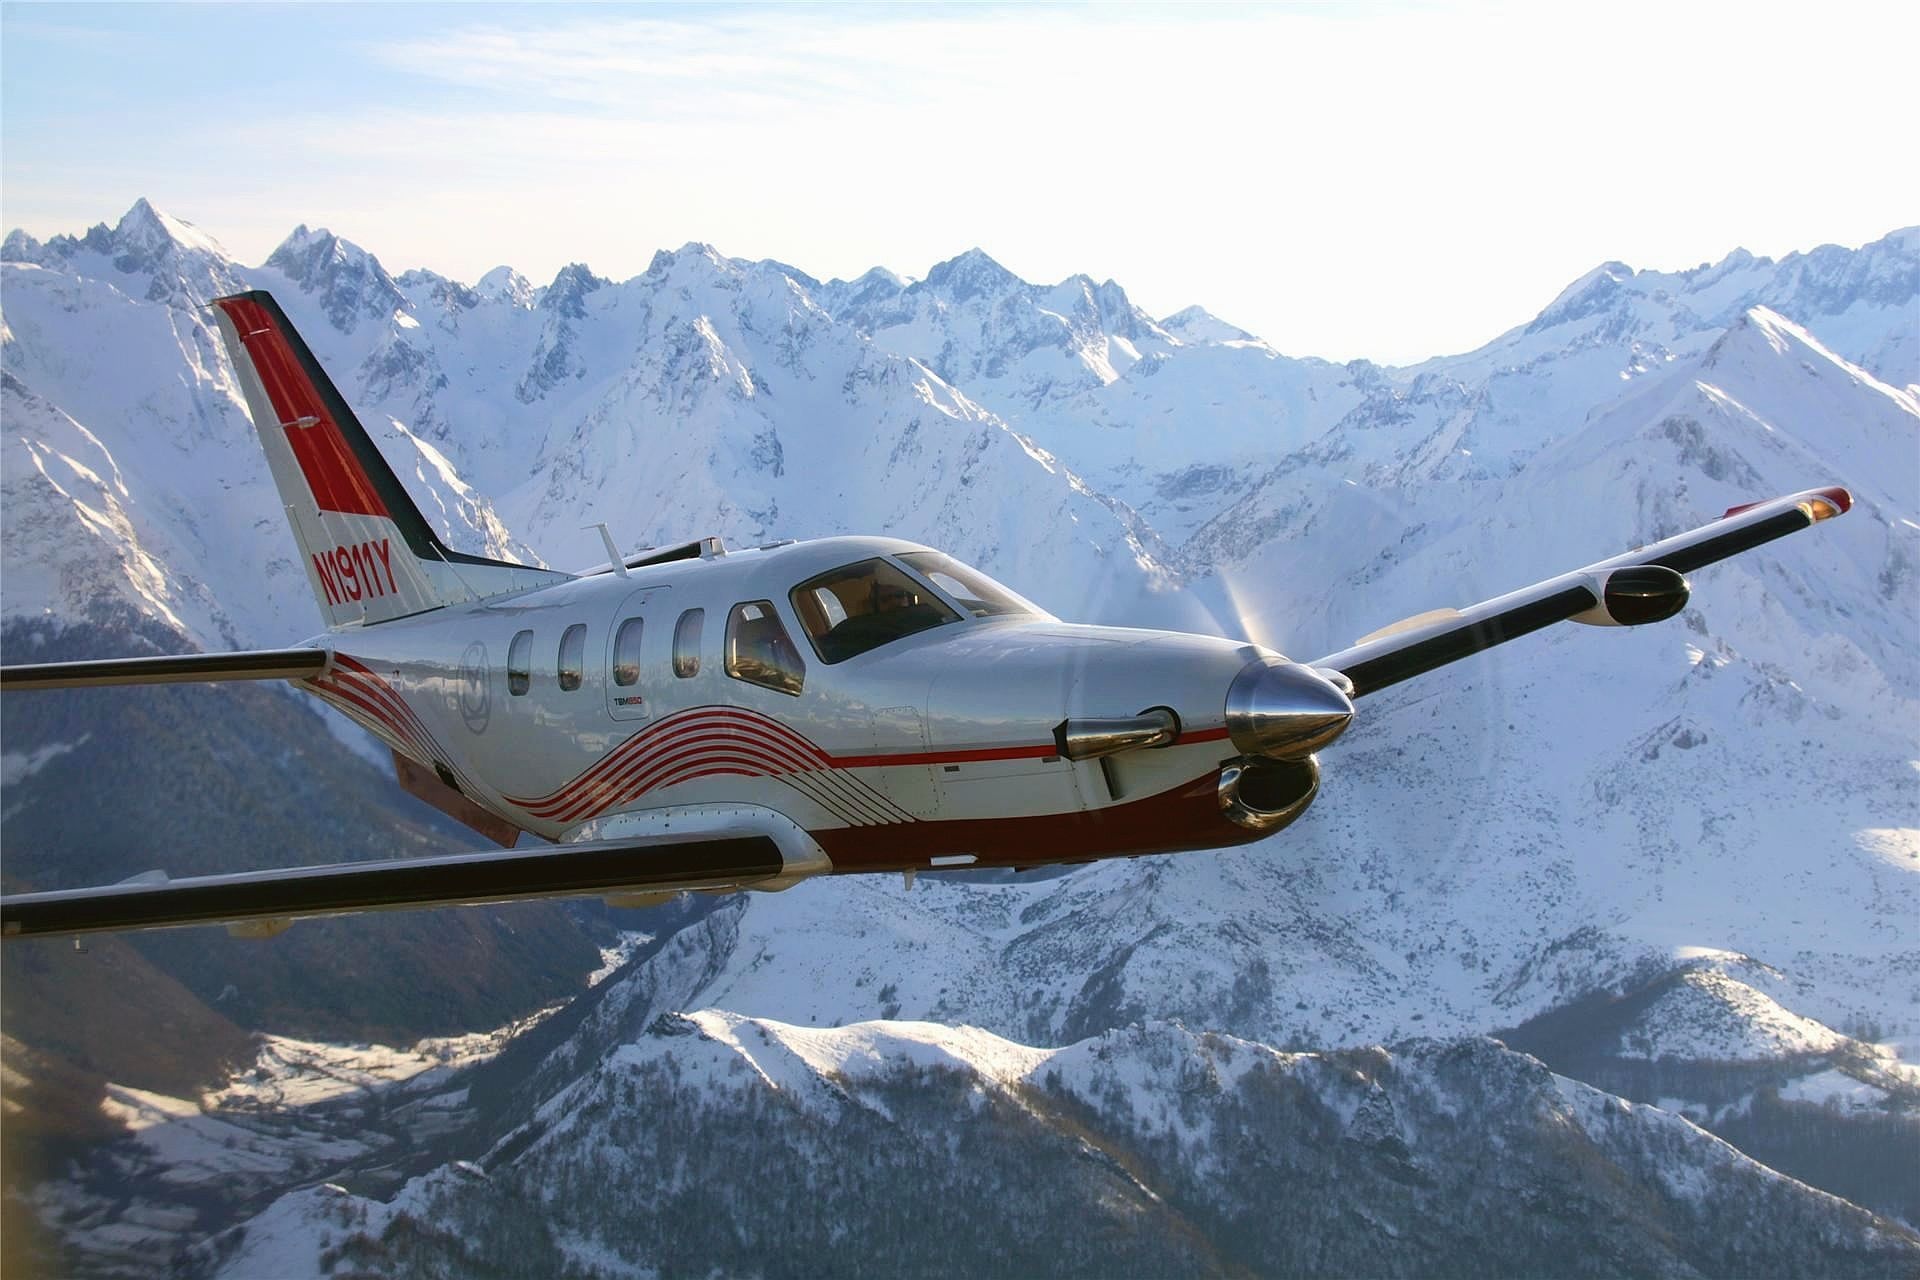 Socata TBM 850, Aircraft ownership, Aviation enthusiasts, Airplane to own, 1920x1280 HD Desktop